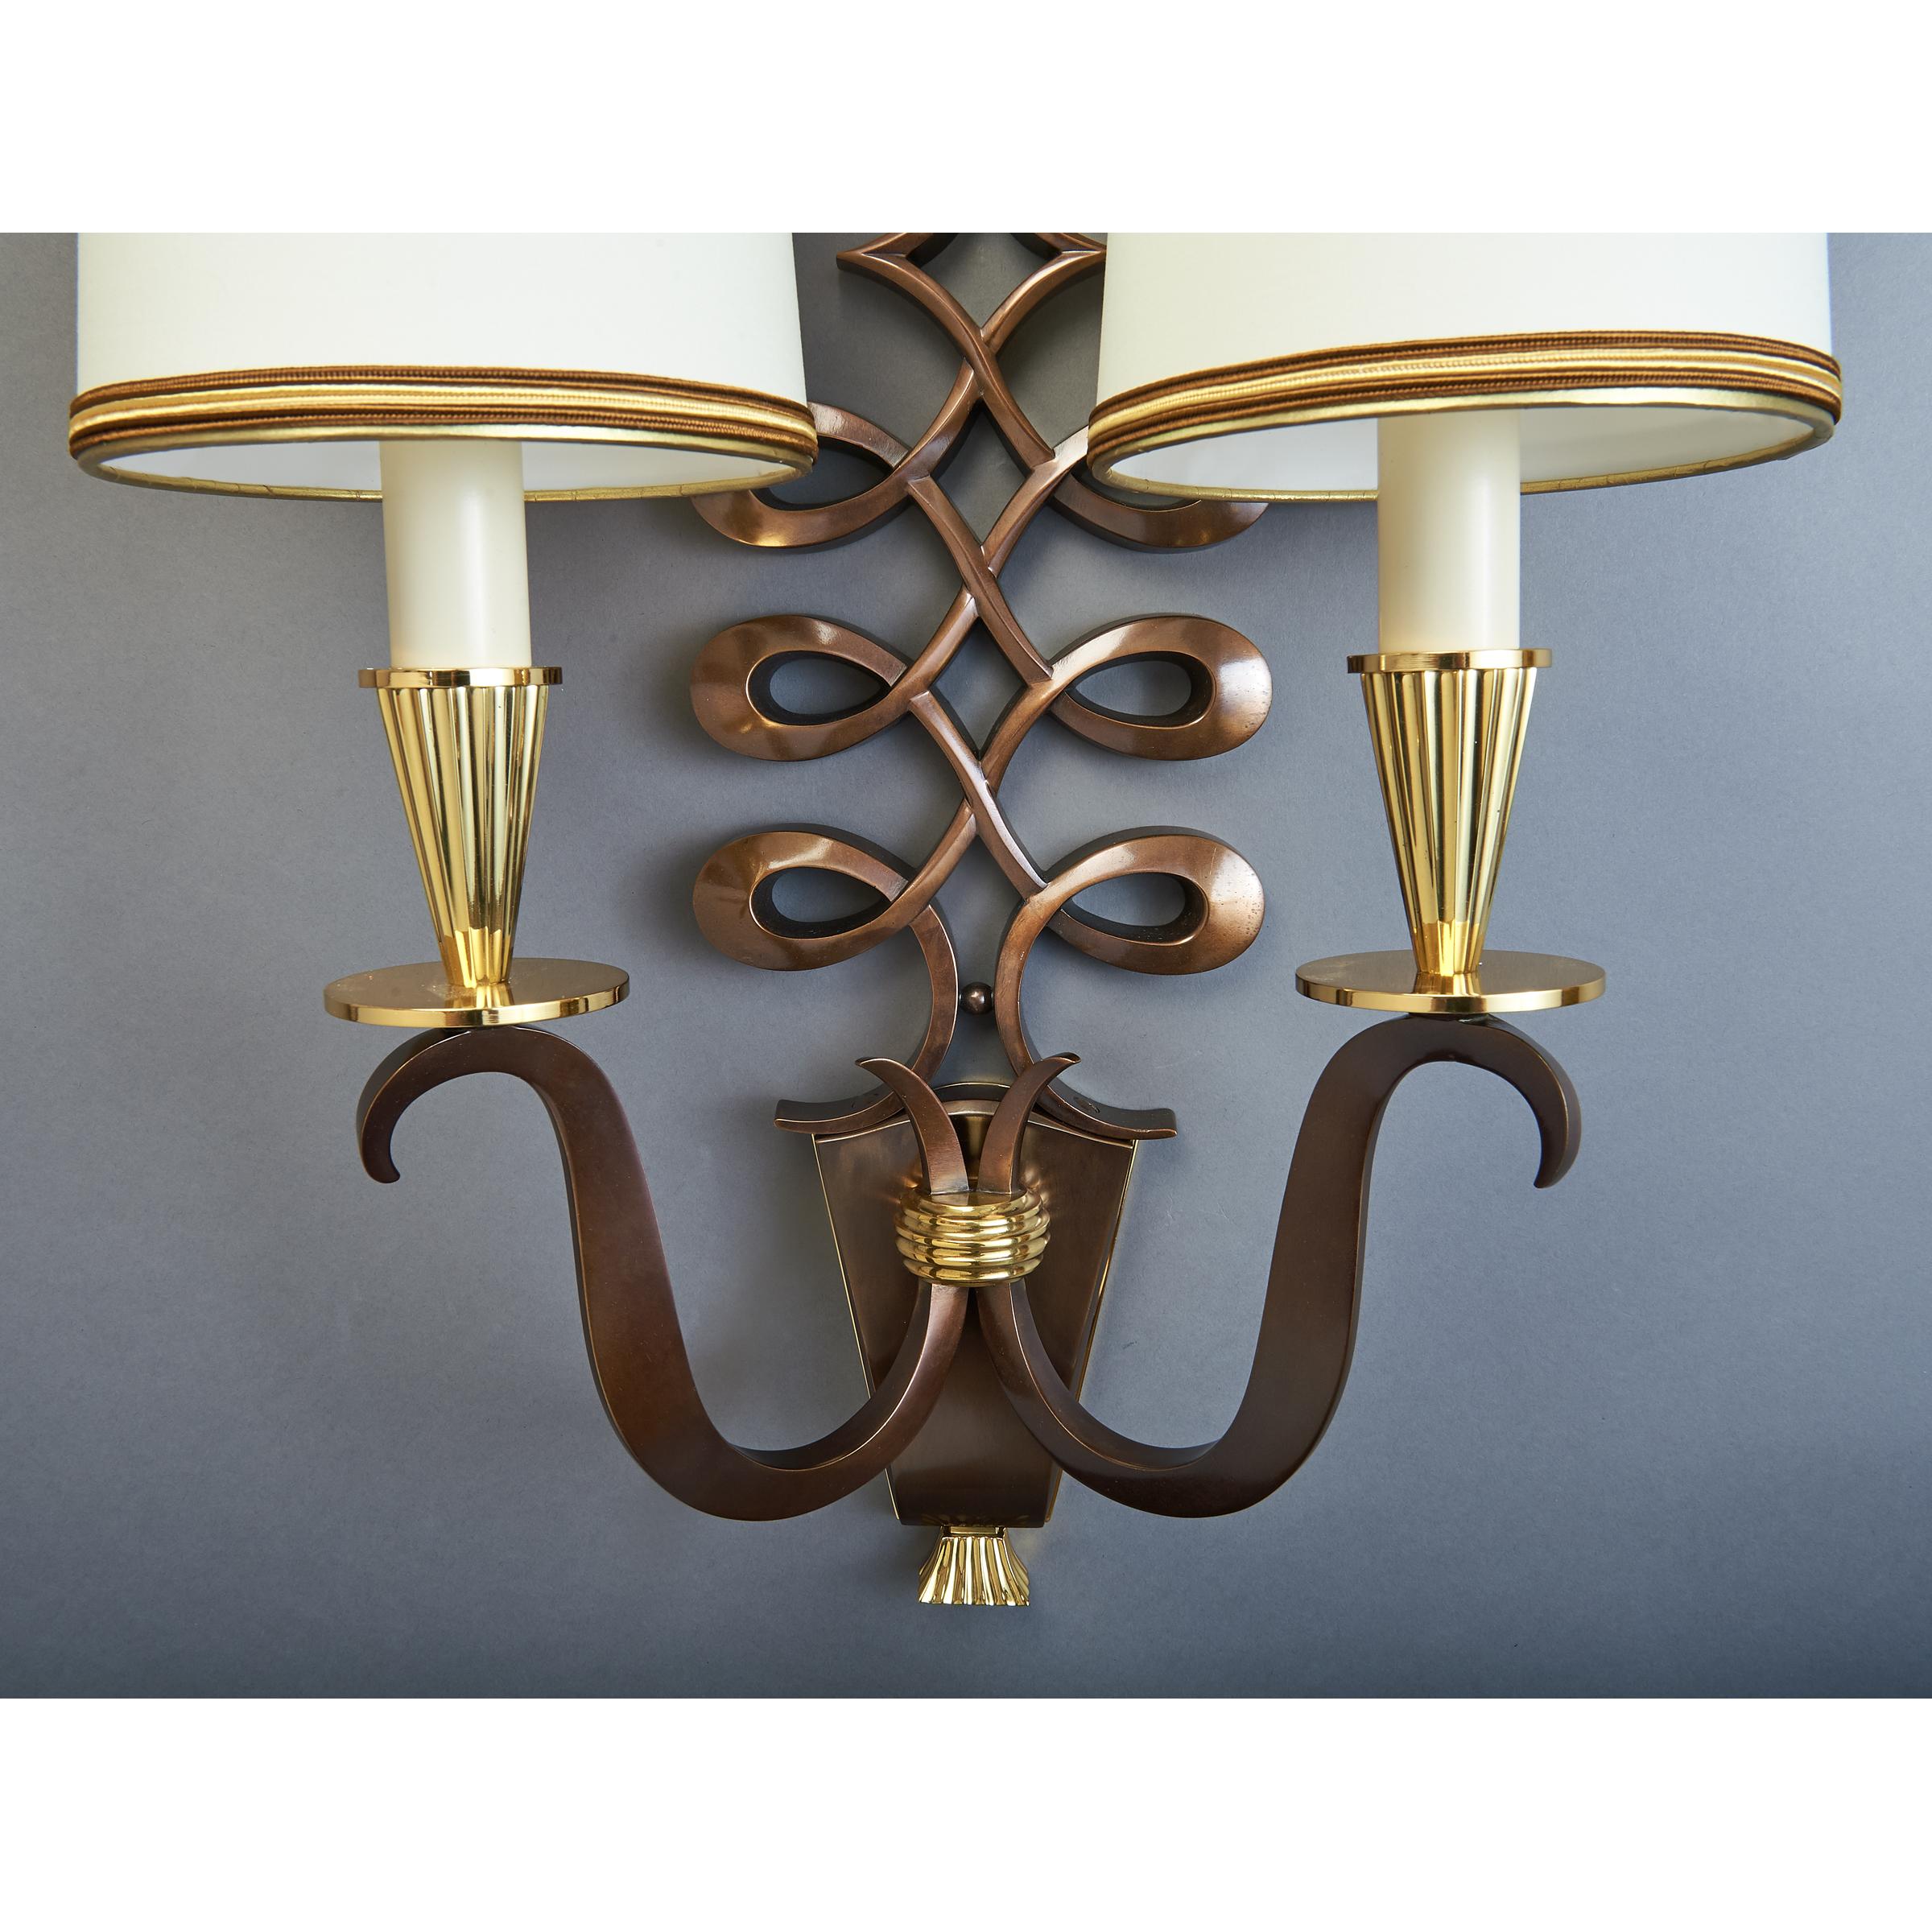 French Important Pair of Genet & Michon Bronze Sconces, France, 1950s For Sale